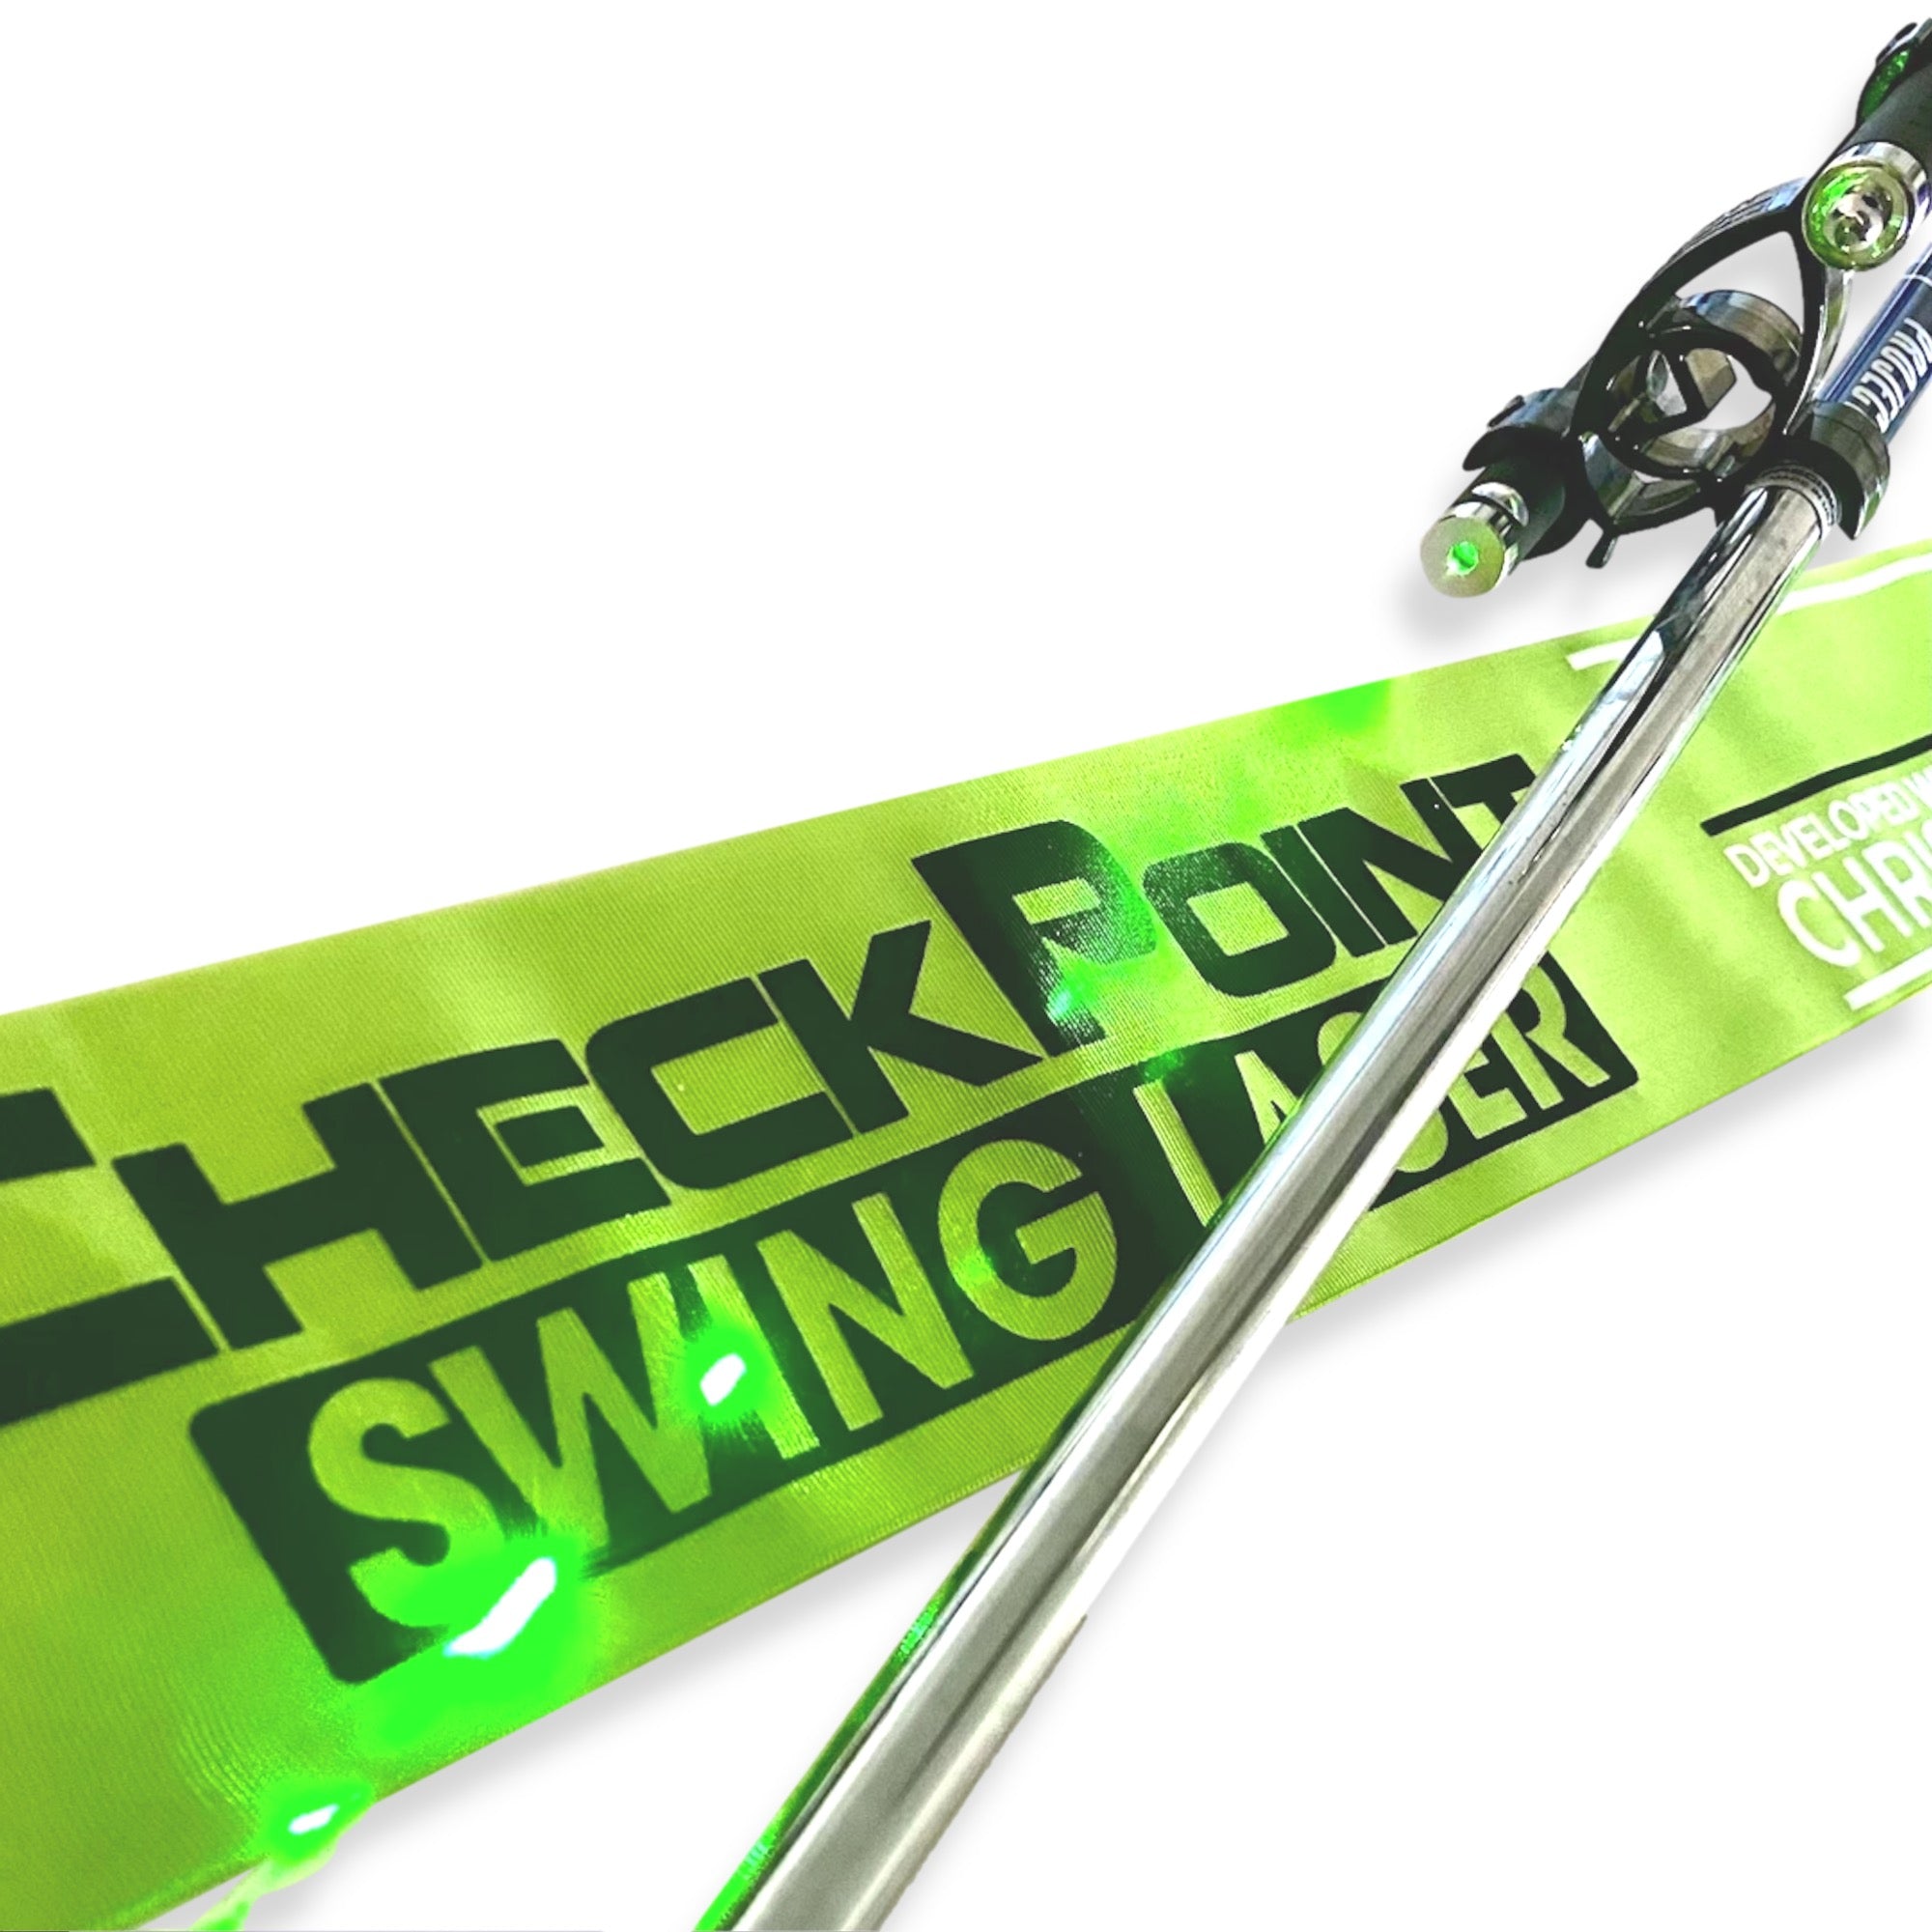 Check Point Swing Laser